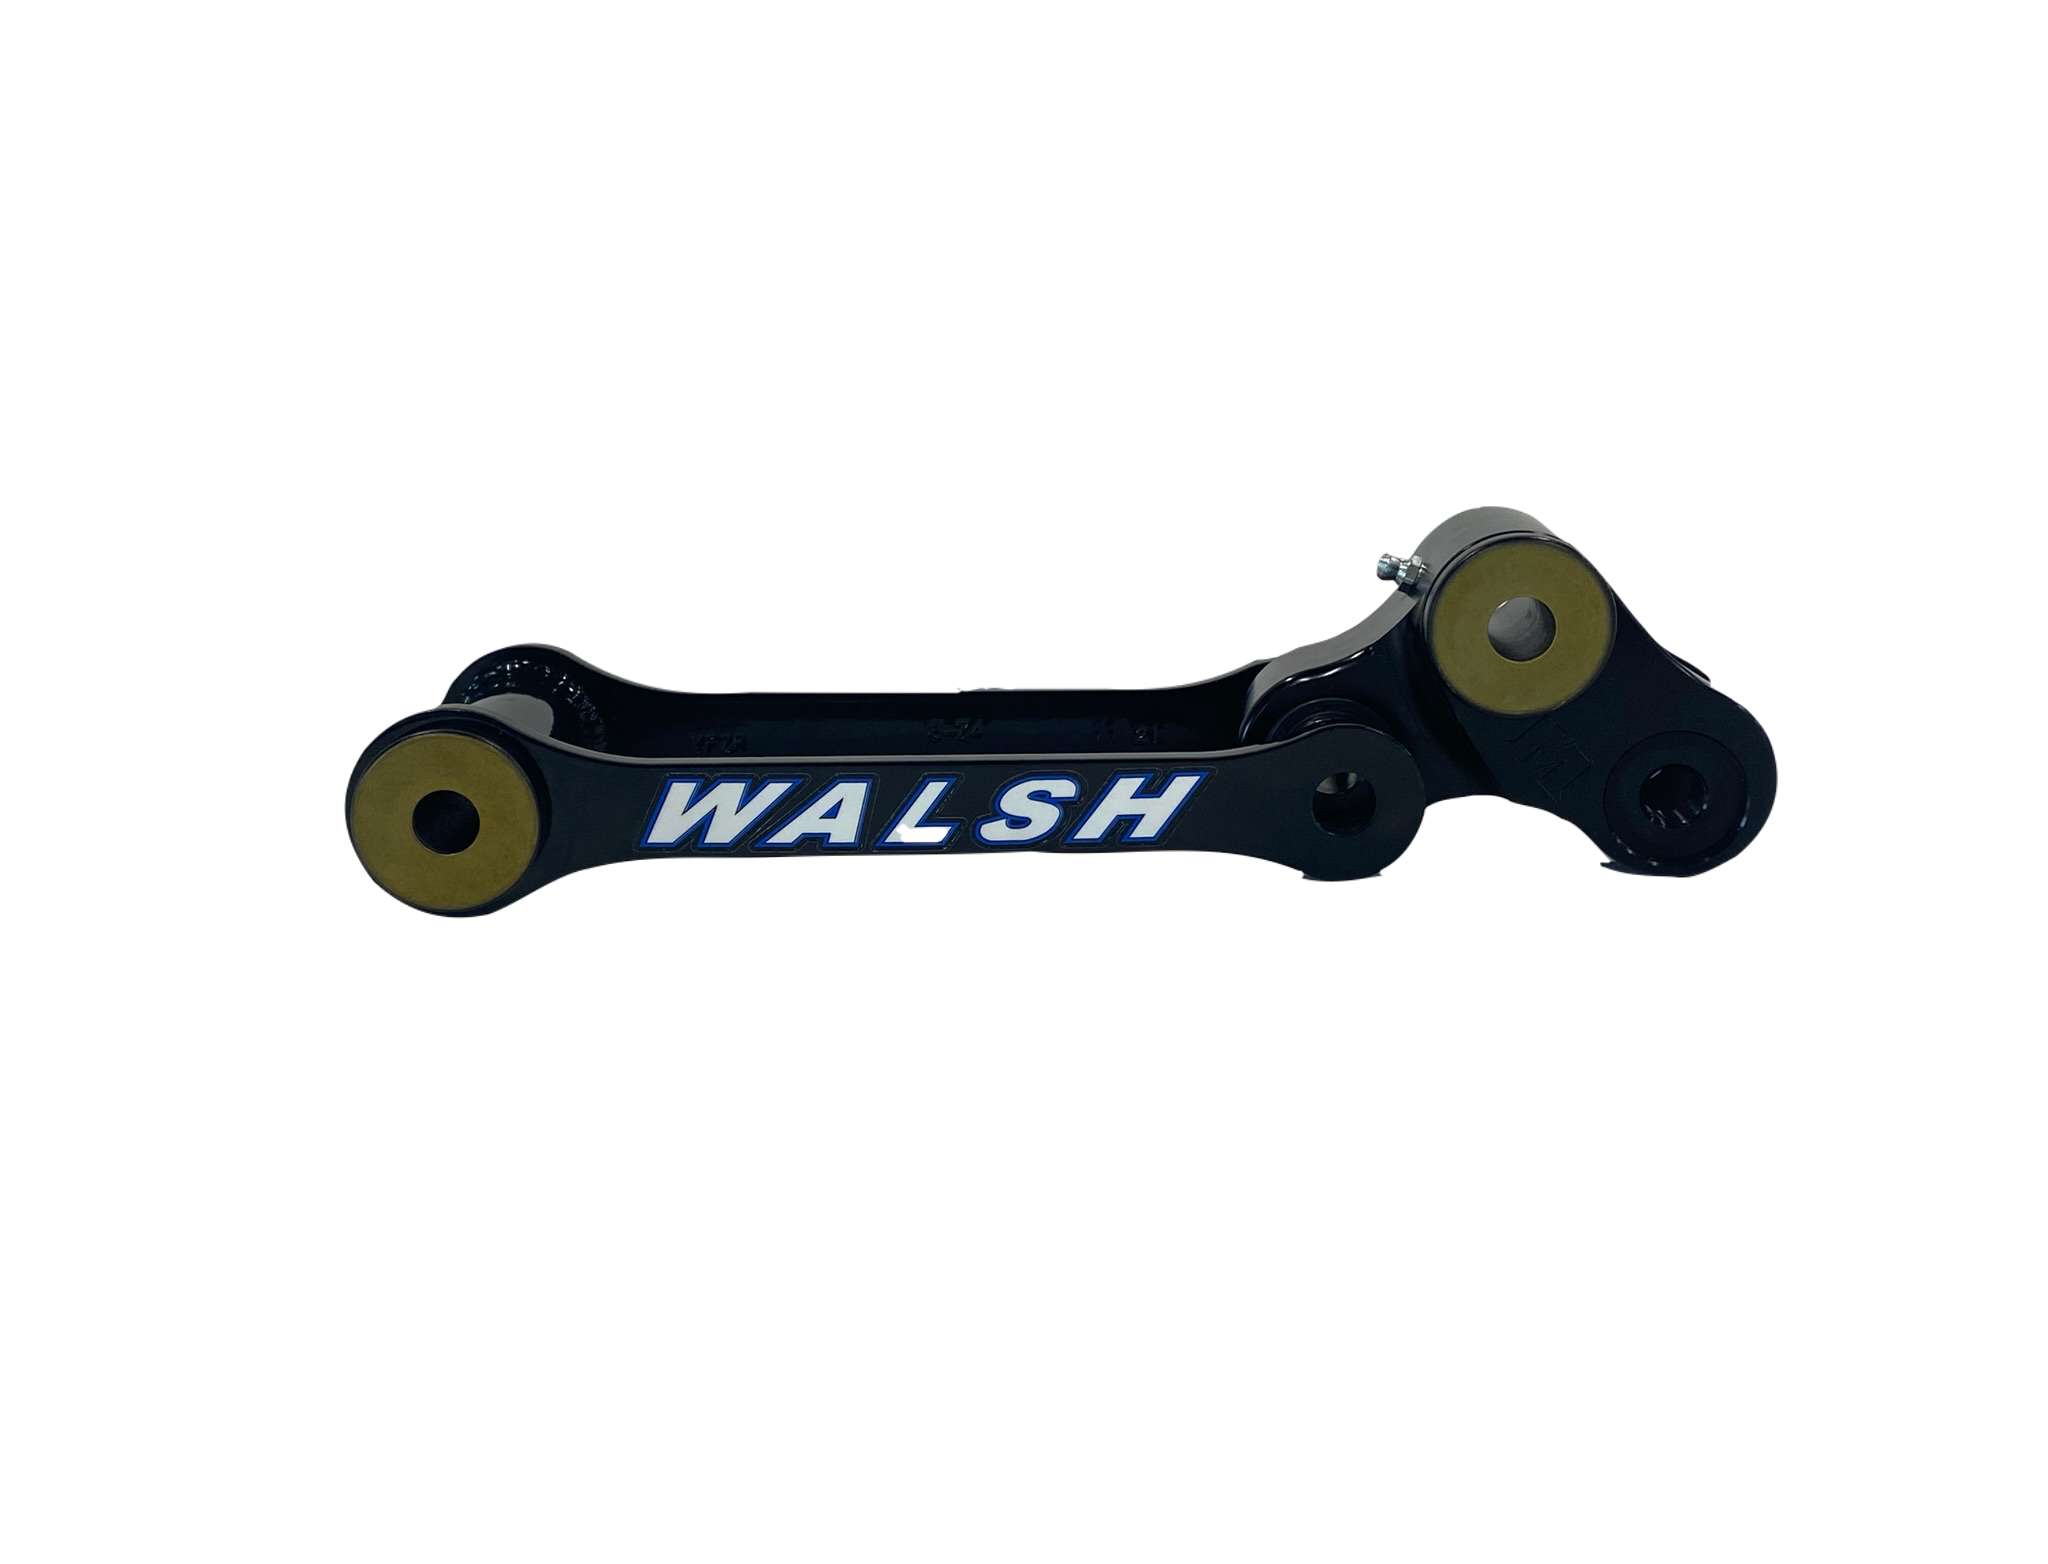 Walsh YFZ450R Linkage MX and XC